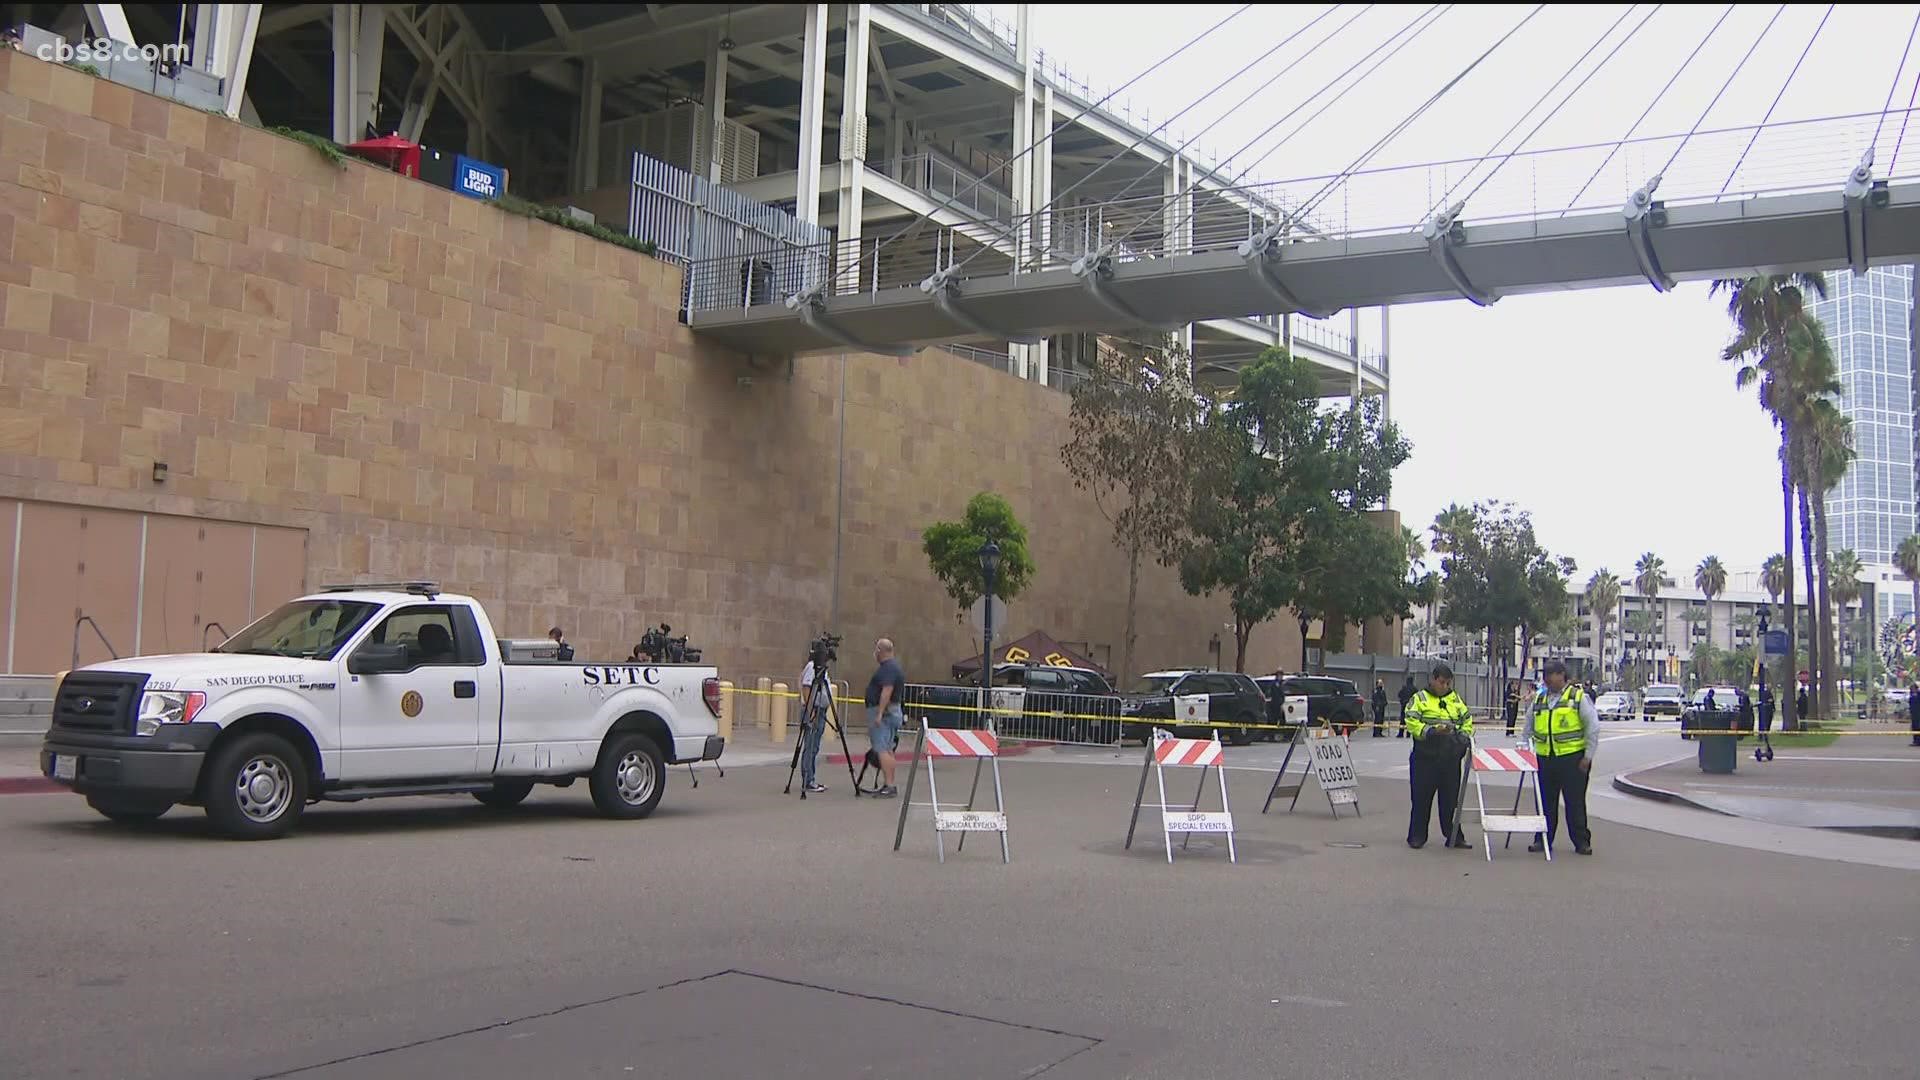 The mother and son were at Petco Park on Saturday when they fell off the 60-foot-high concourse near Tony Gwynn Dr. and L Street.